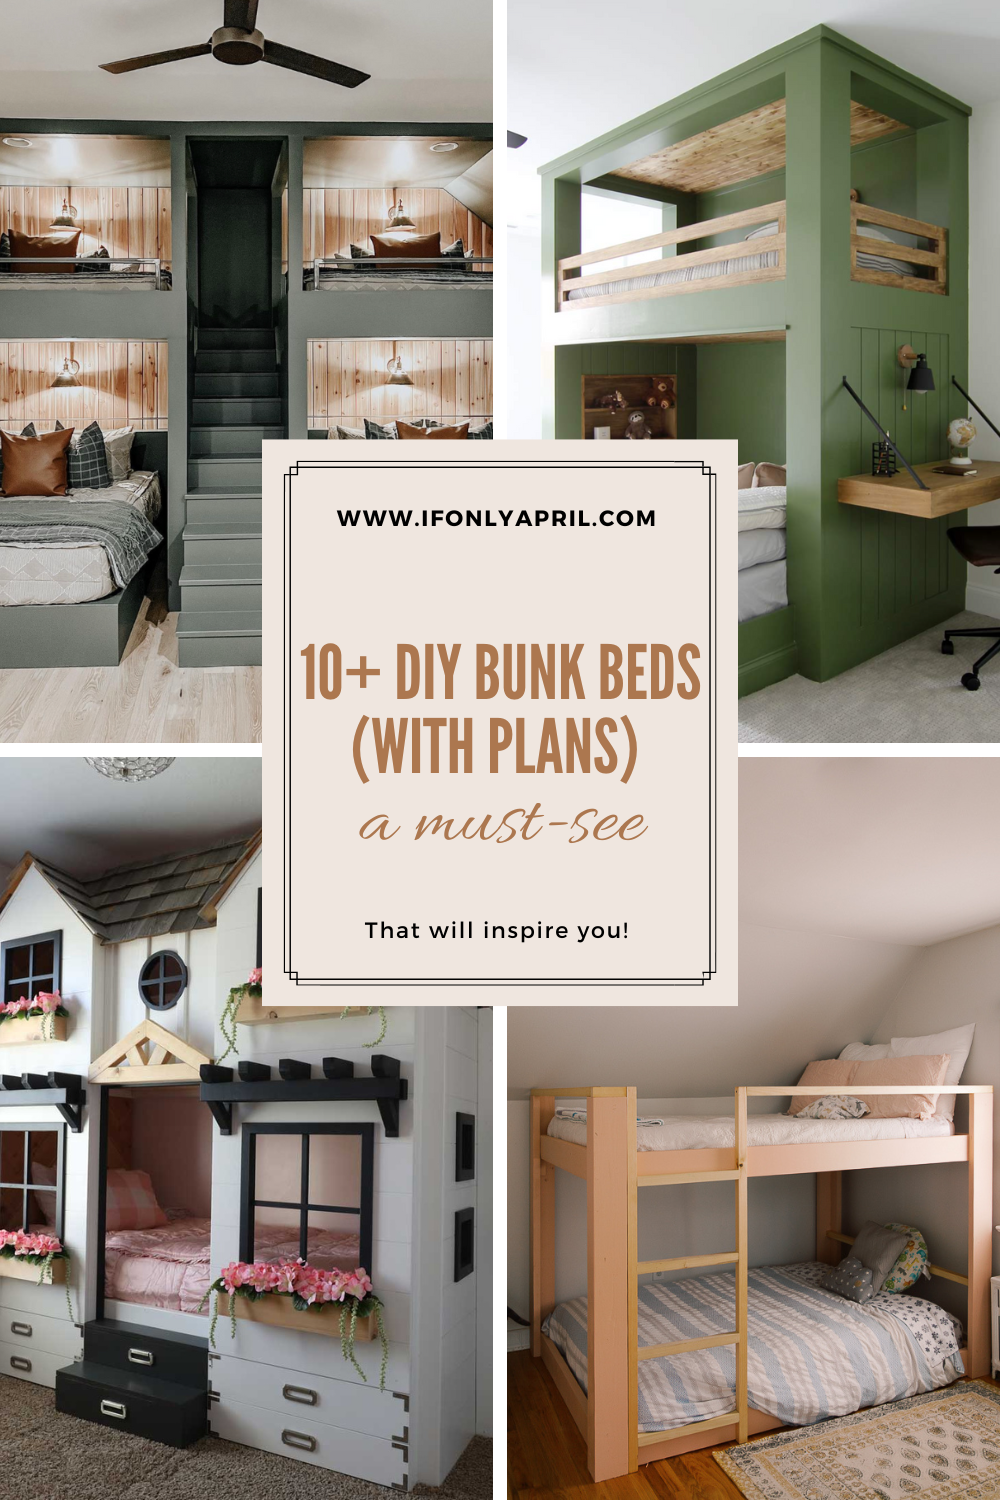 10+ amazing diy bunk beds ideas with plans - if only april